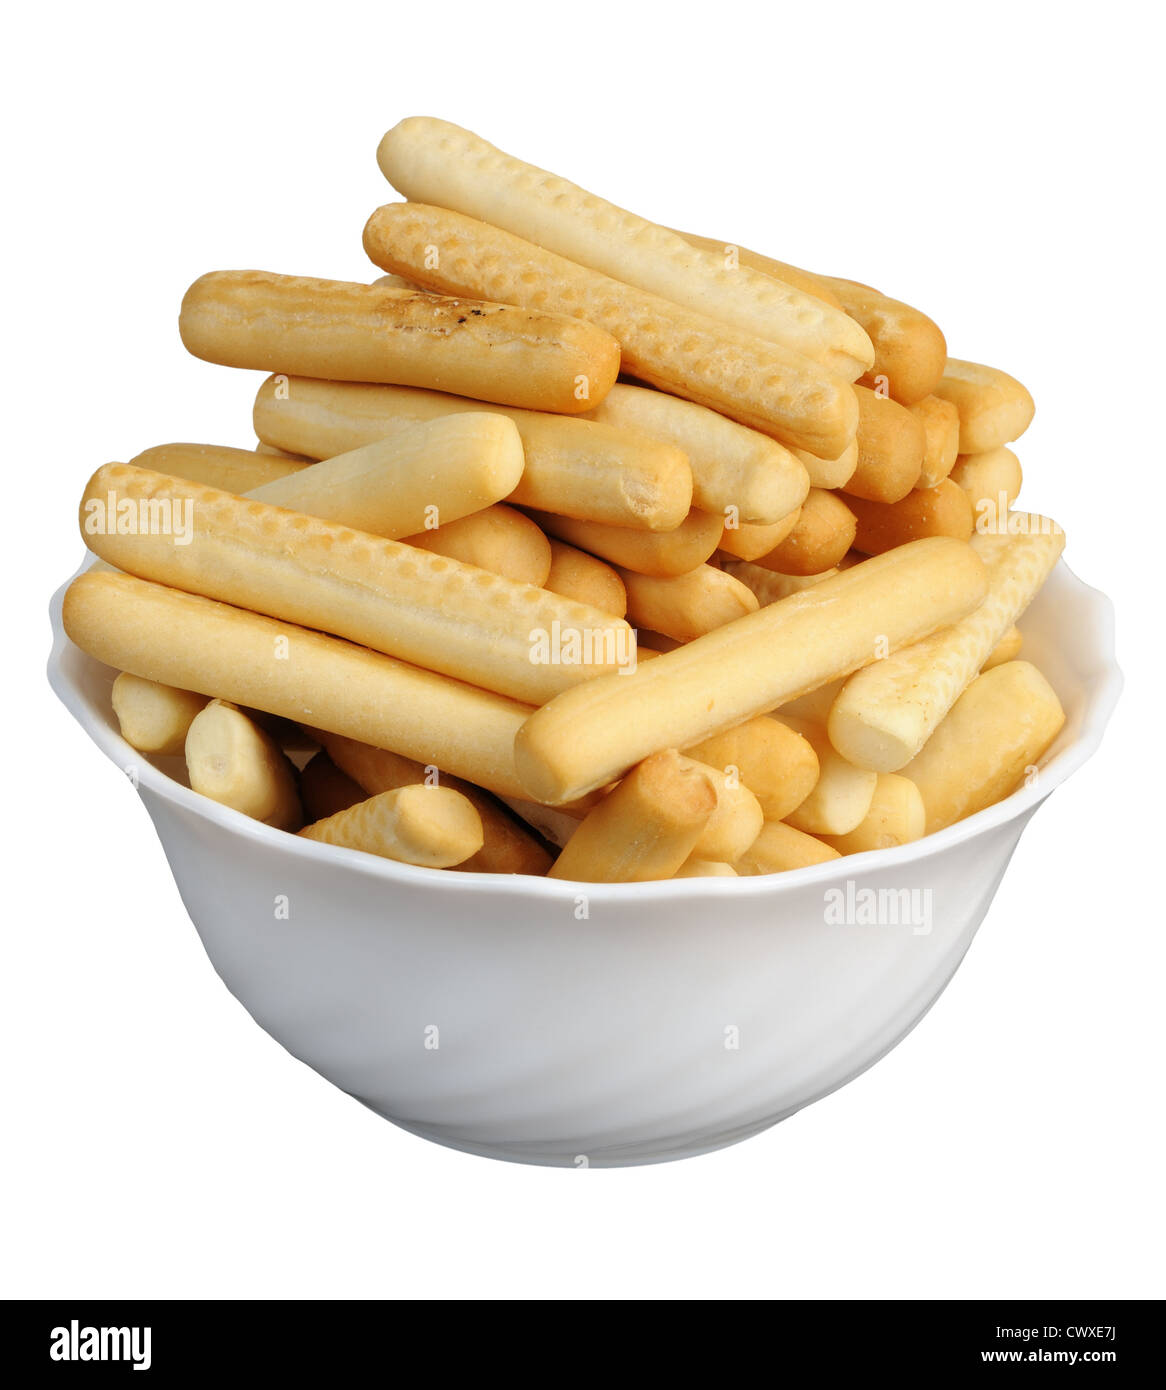 Crackers in a white cup on a white background, isolated. Stock Photo